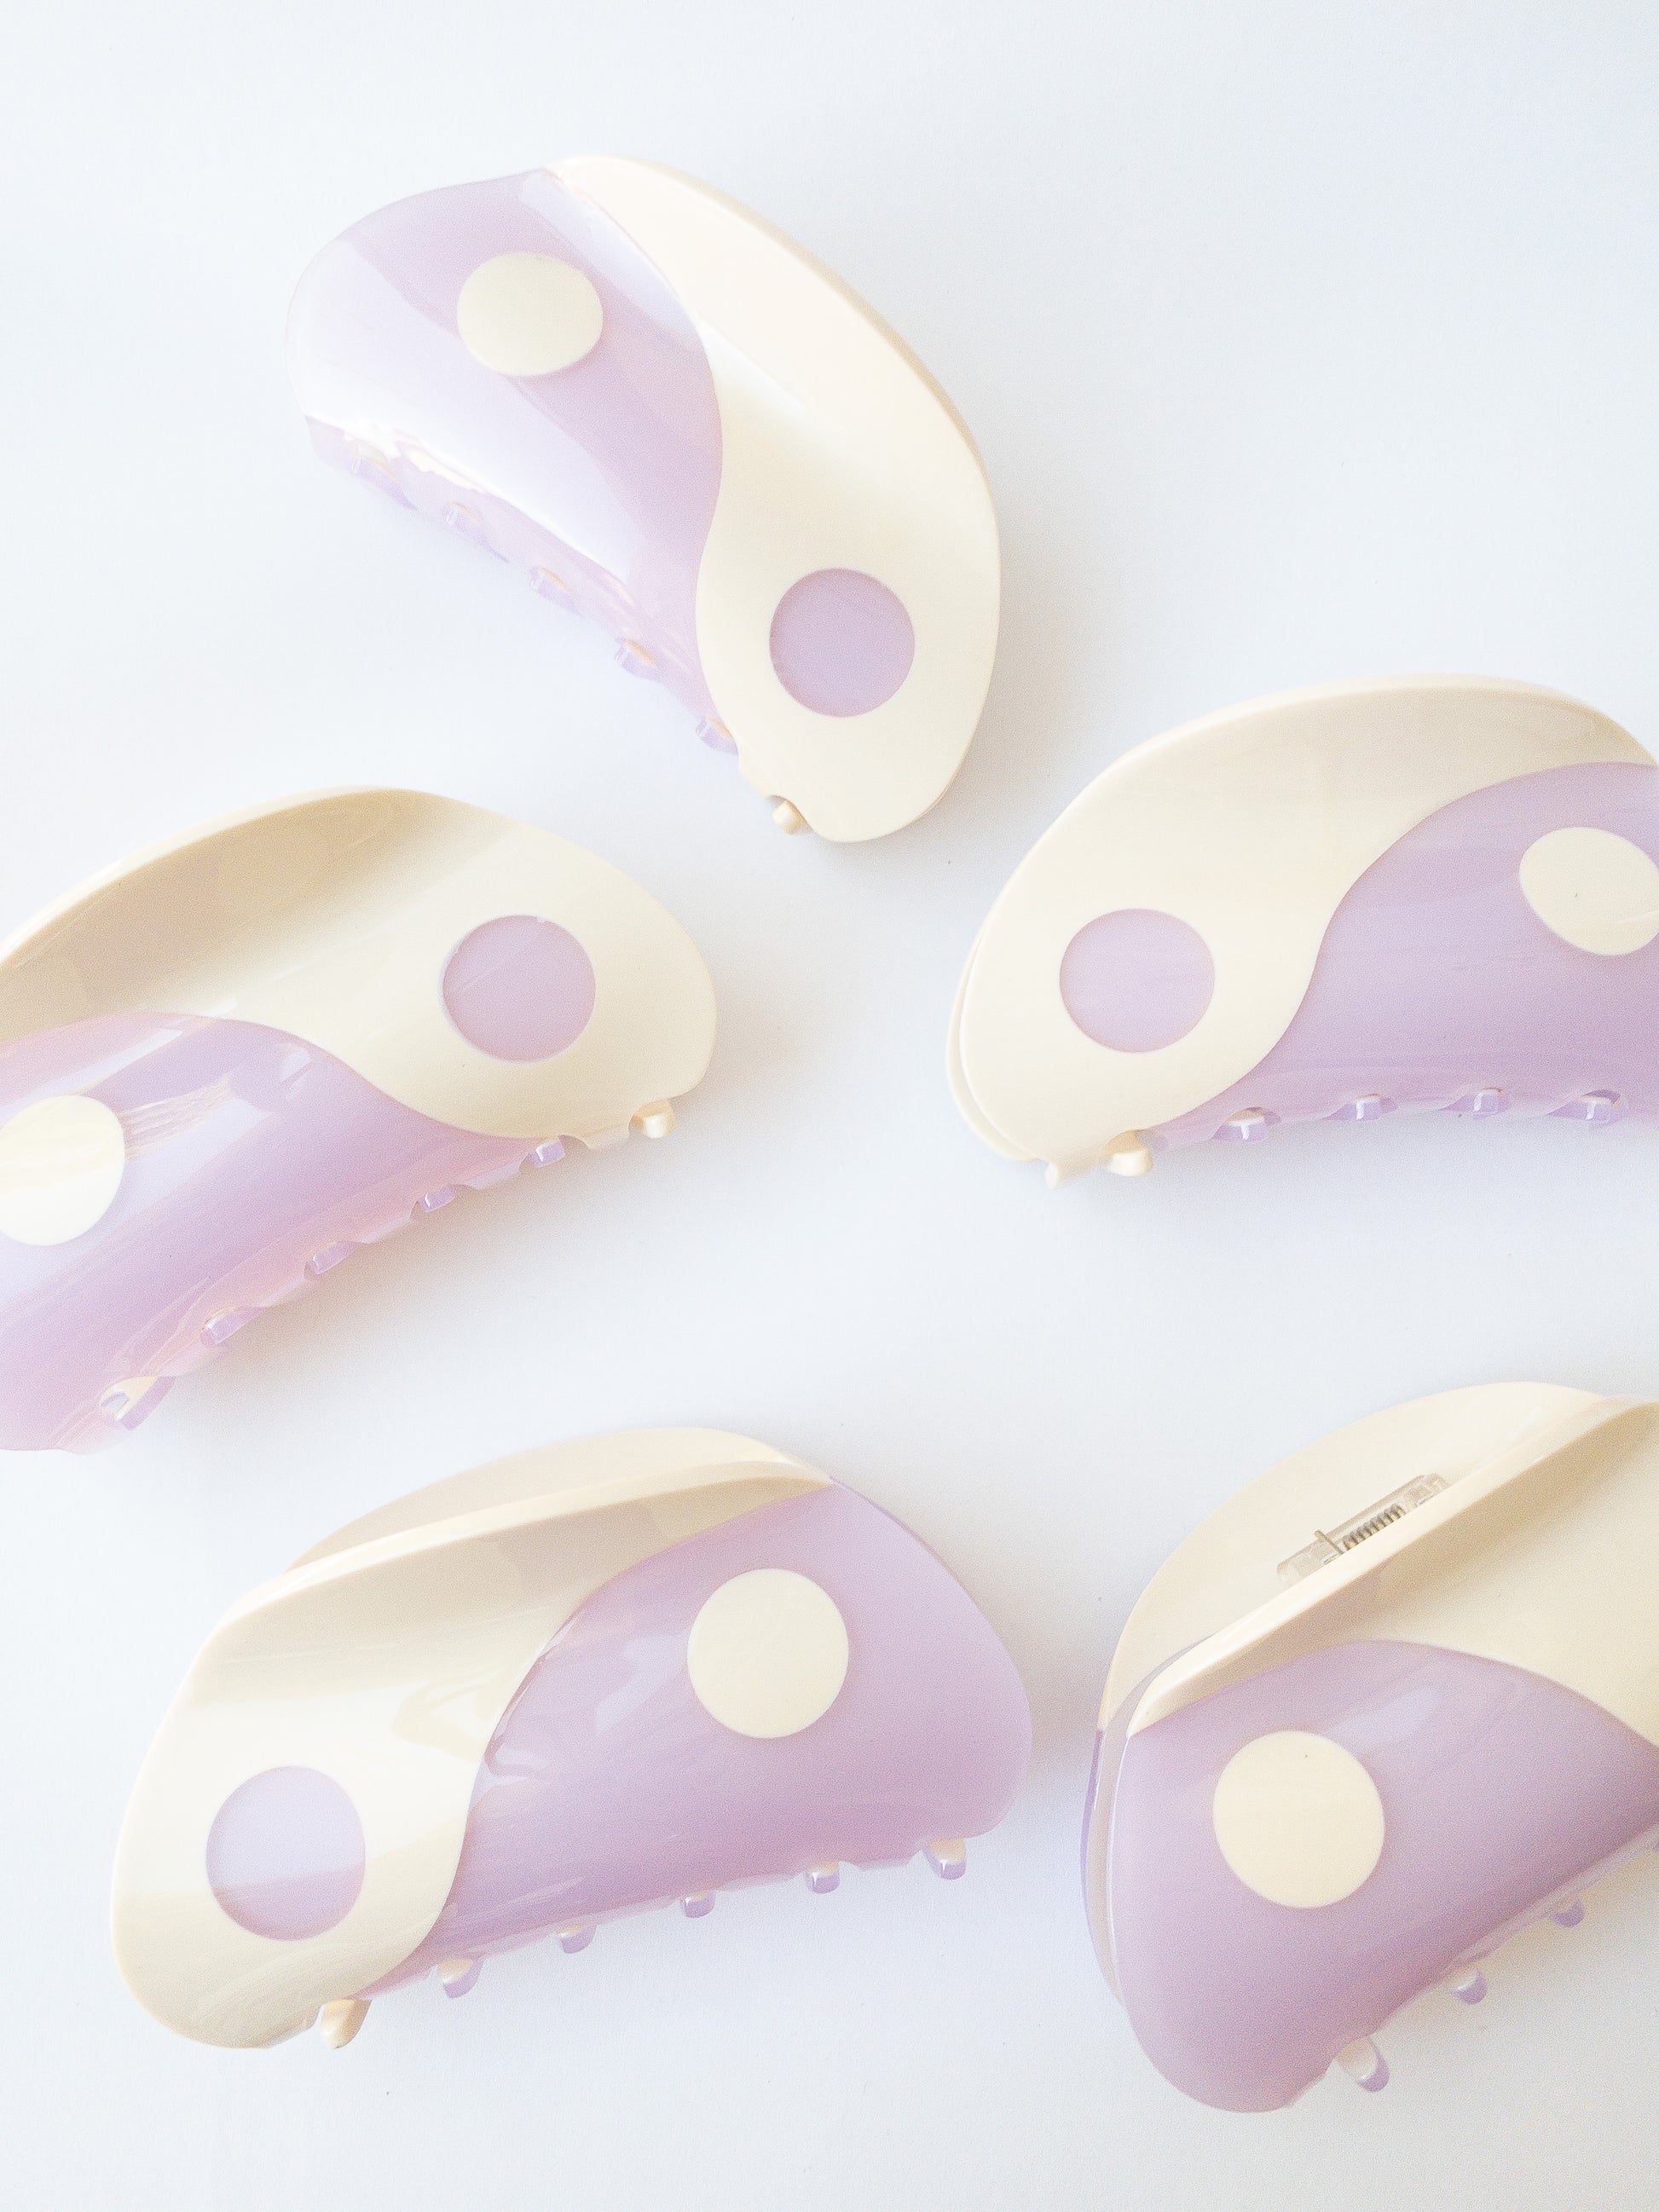 Large yin yang hair claw clip with a beautiful curve of lilac purple and cream white colors. This claw is shiny and strong, a great everyday staple.